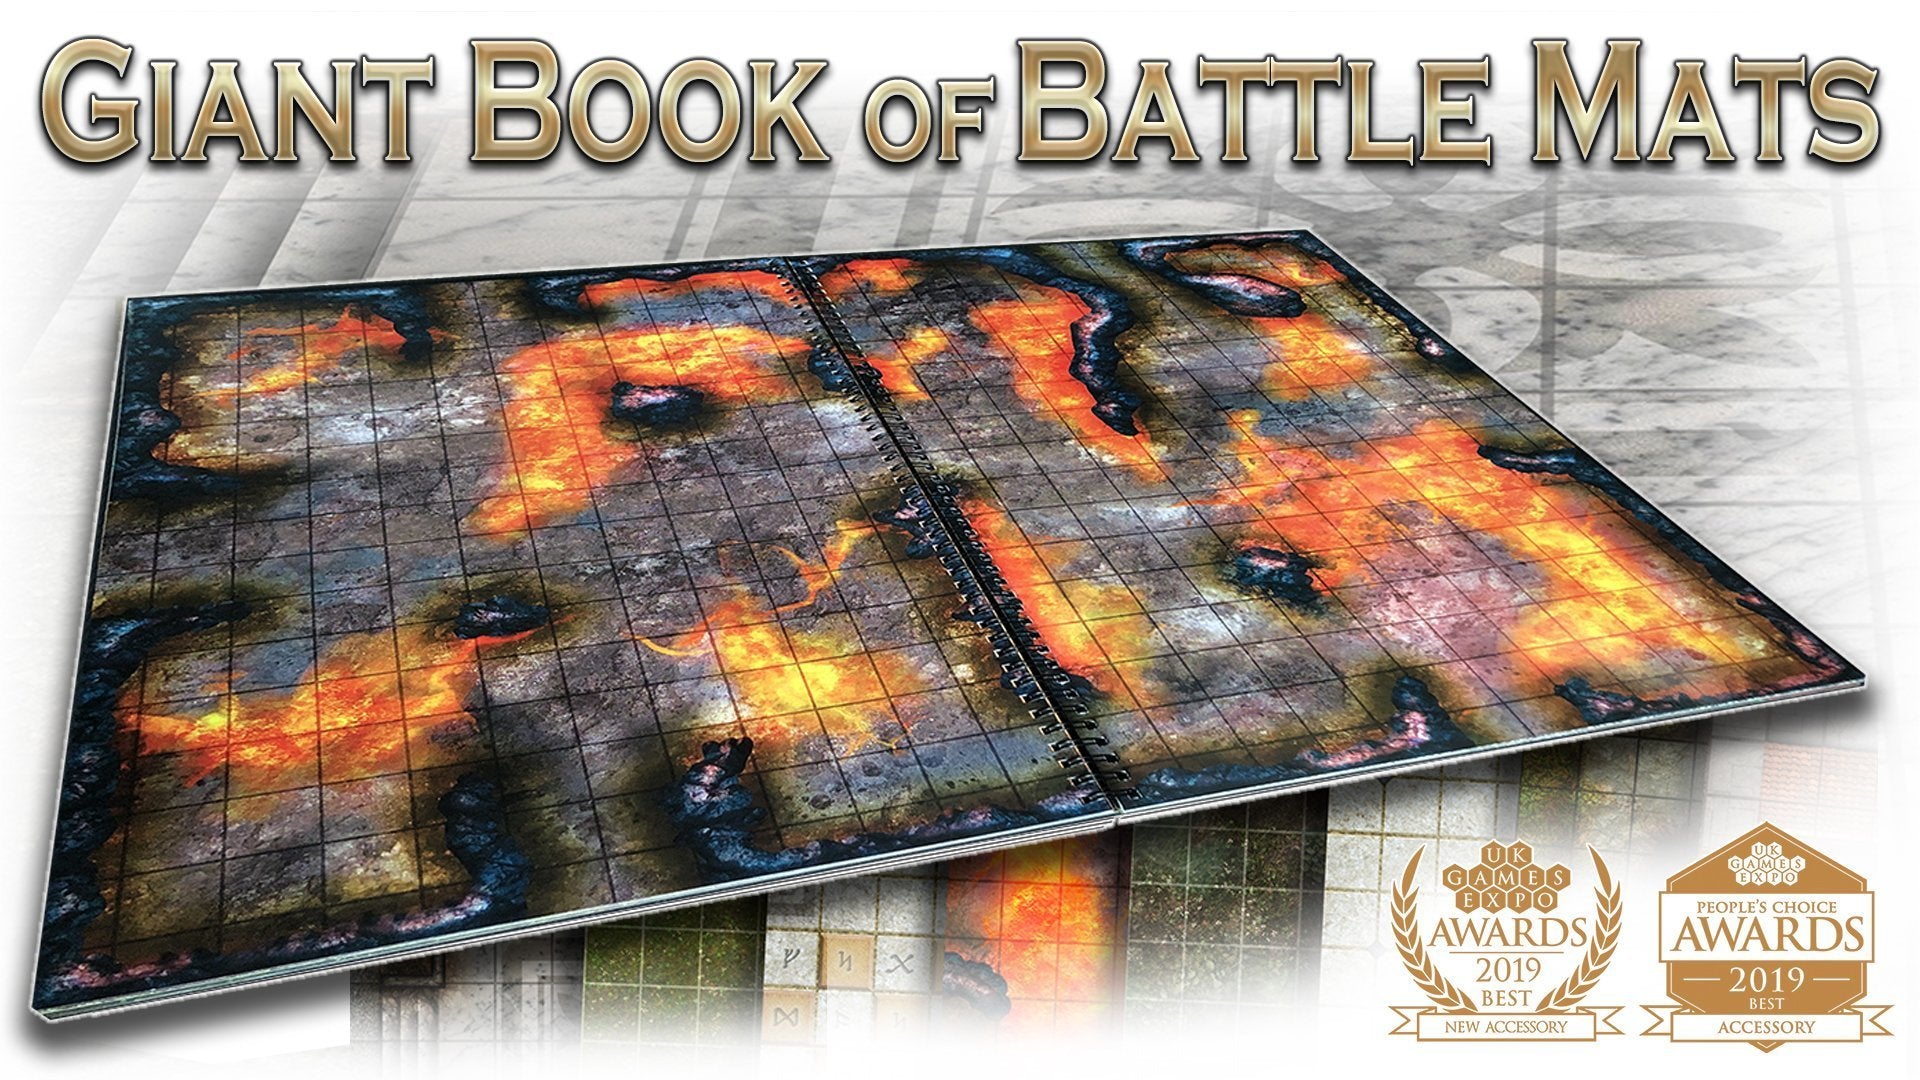 LokeBattleMats @Dragonmeet on X: Lets cheer up January with a Giveaway!  Chance to win Towns & Taverns Battle Map Books before they hit the shops on  Jan 27! One lucky winner wins